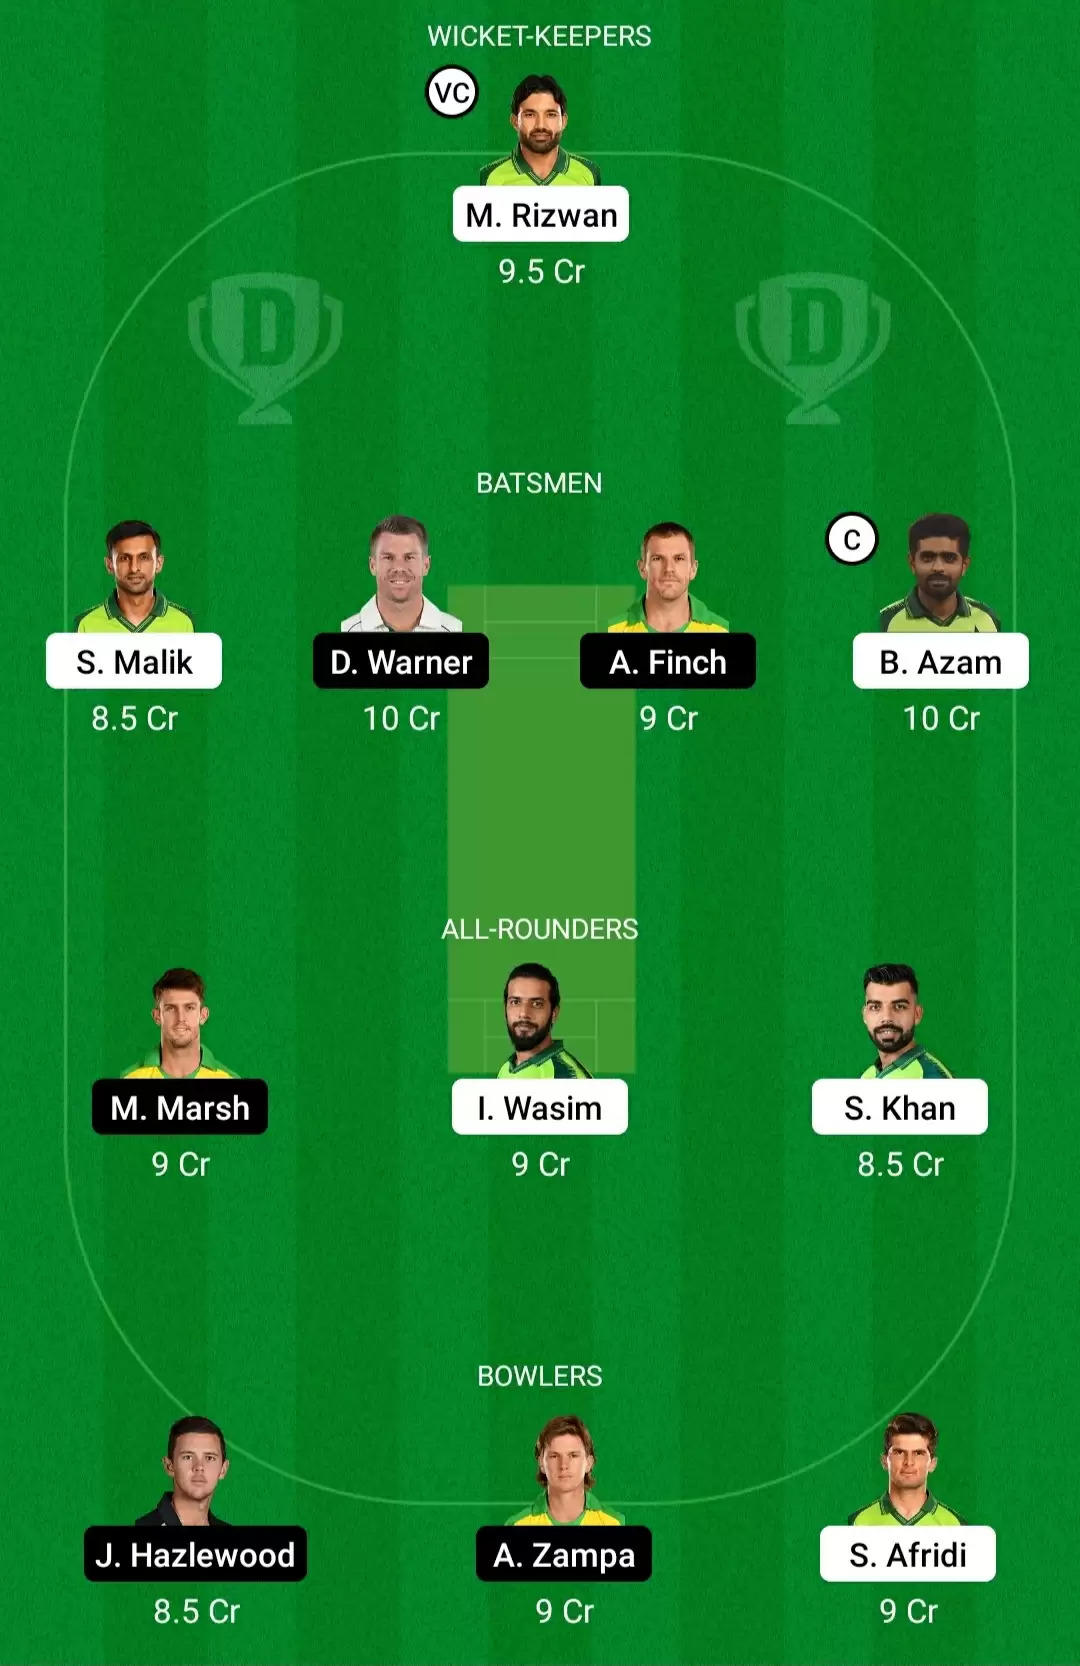 PAK vs AUS Dream11 Prediction for T20 World Cup 2021: Playing XI, Fantasy Cricket Tips, Team, Weather Updates and Pitch Report